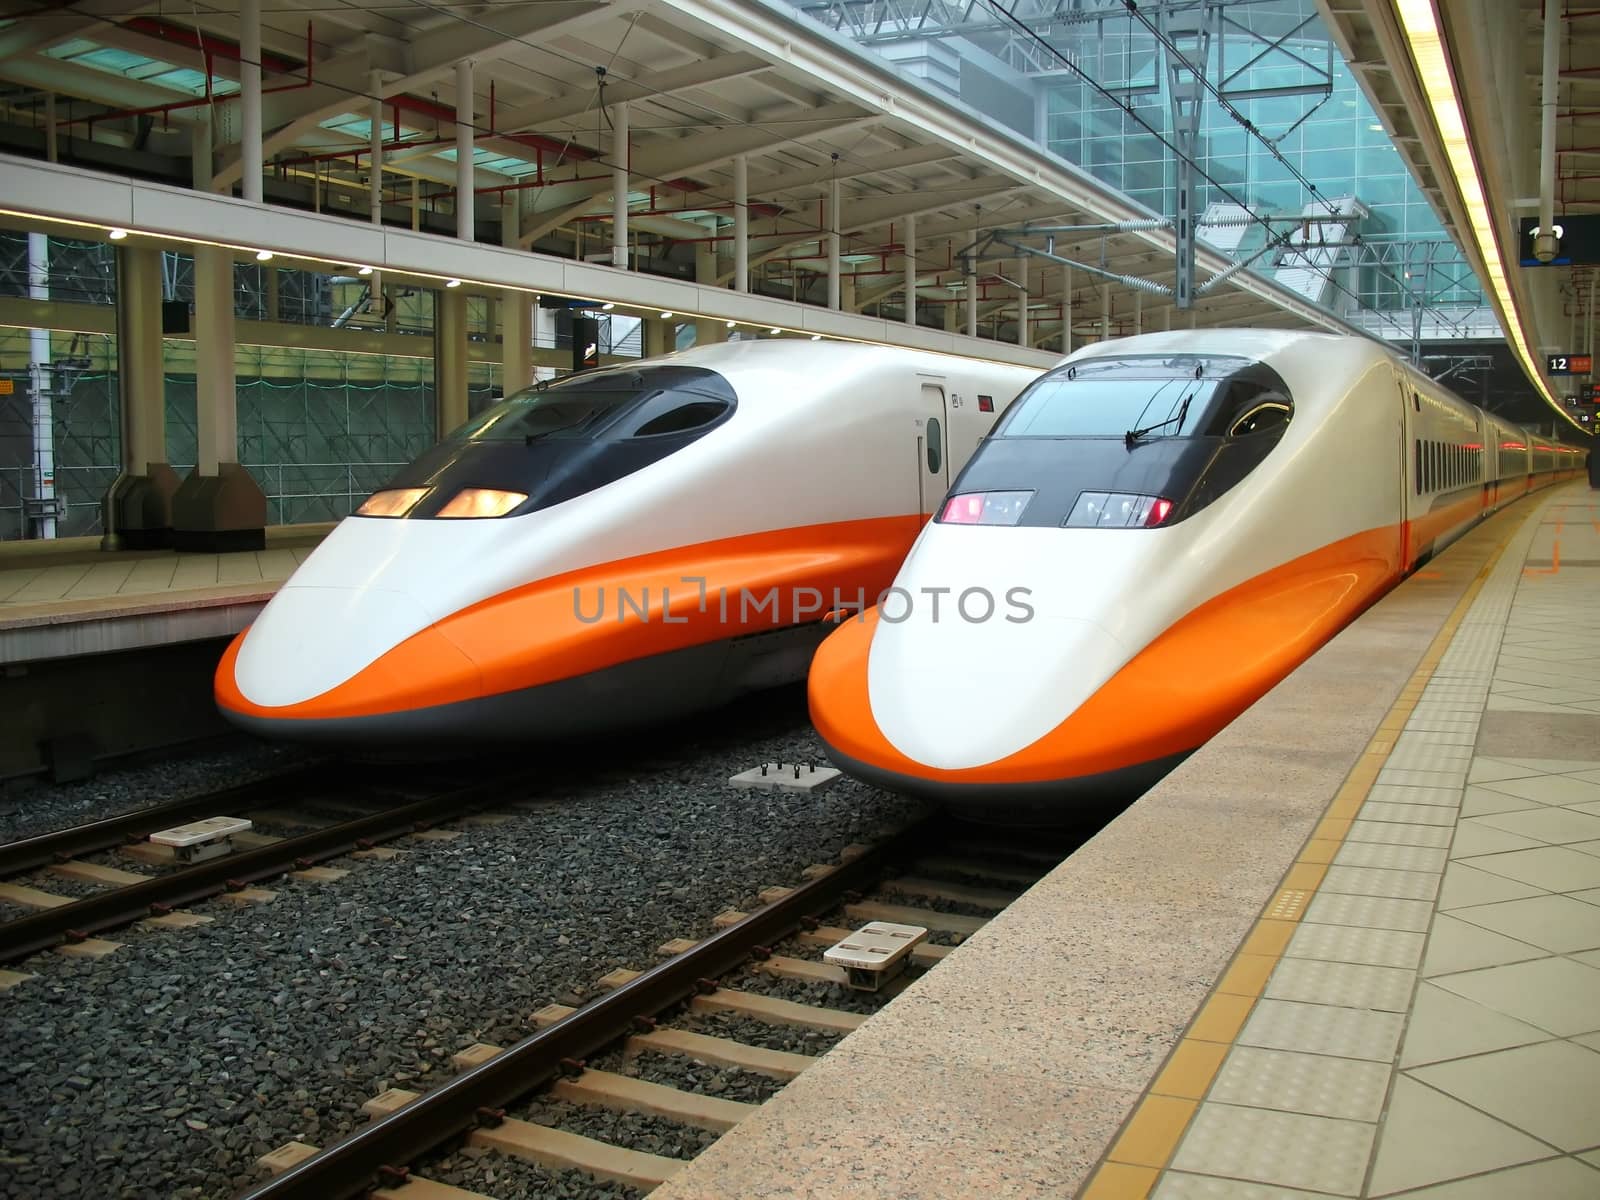 -- two engines of the recently finished Taiwan high speed railway
